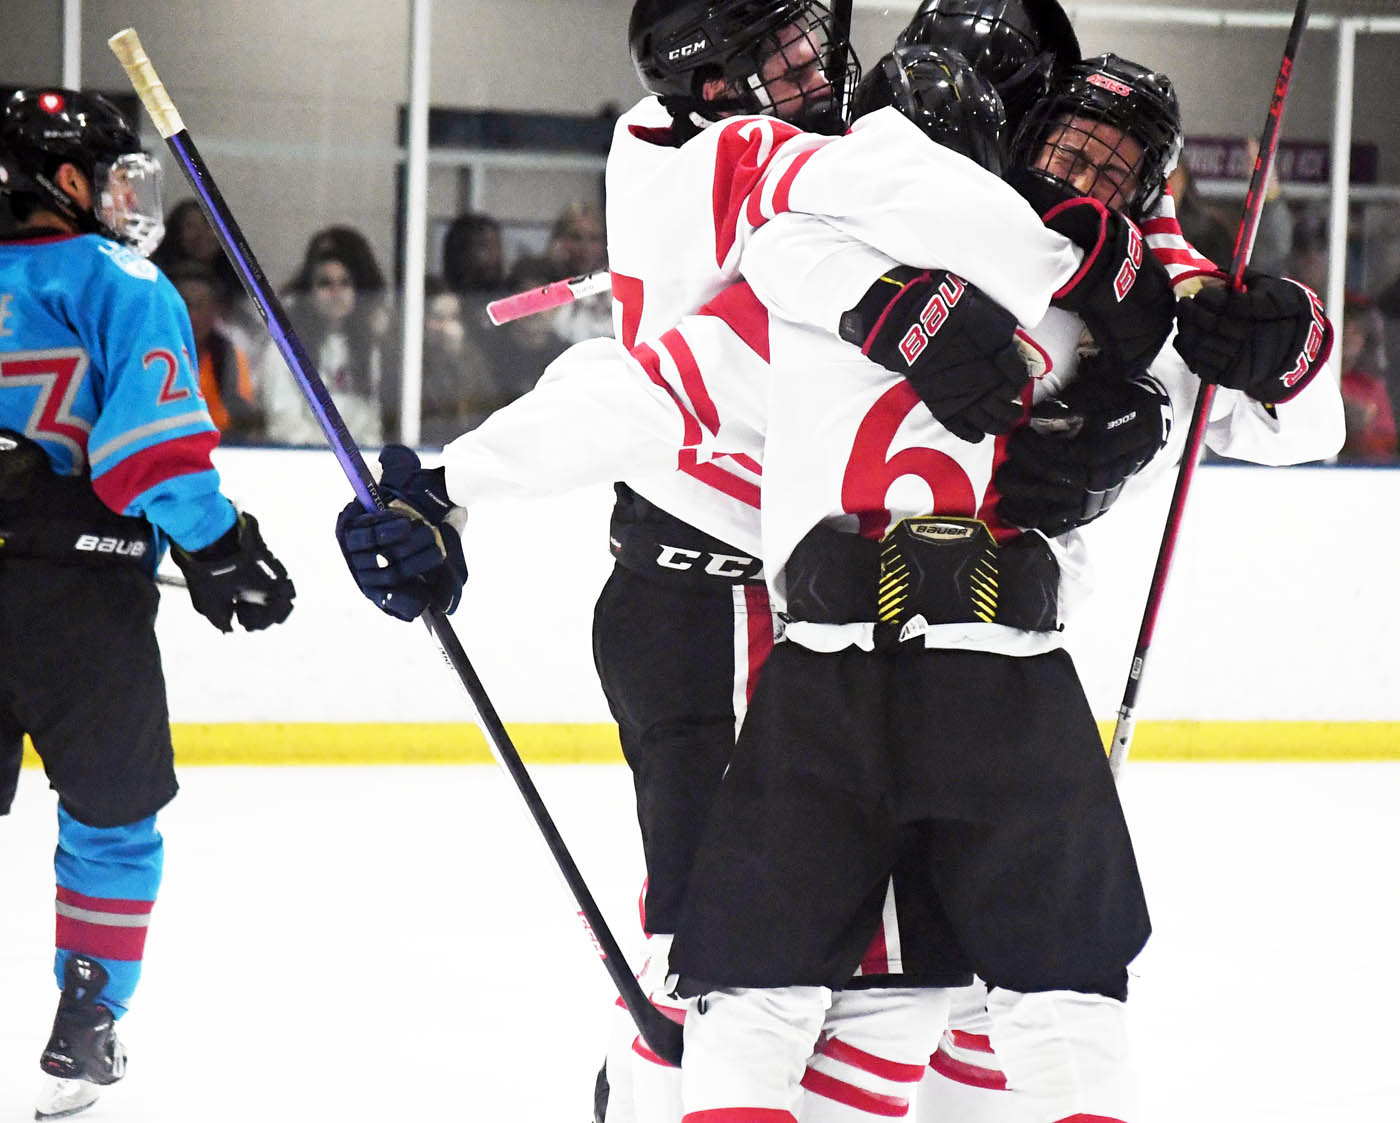 SDSU's ice men face off second semester with games at Kroc Center